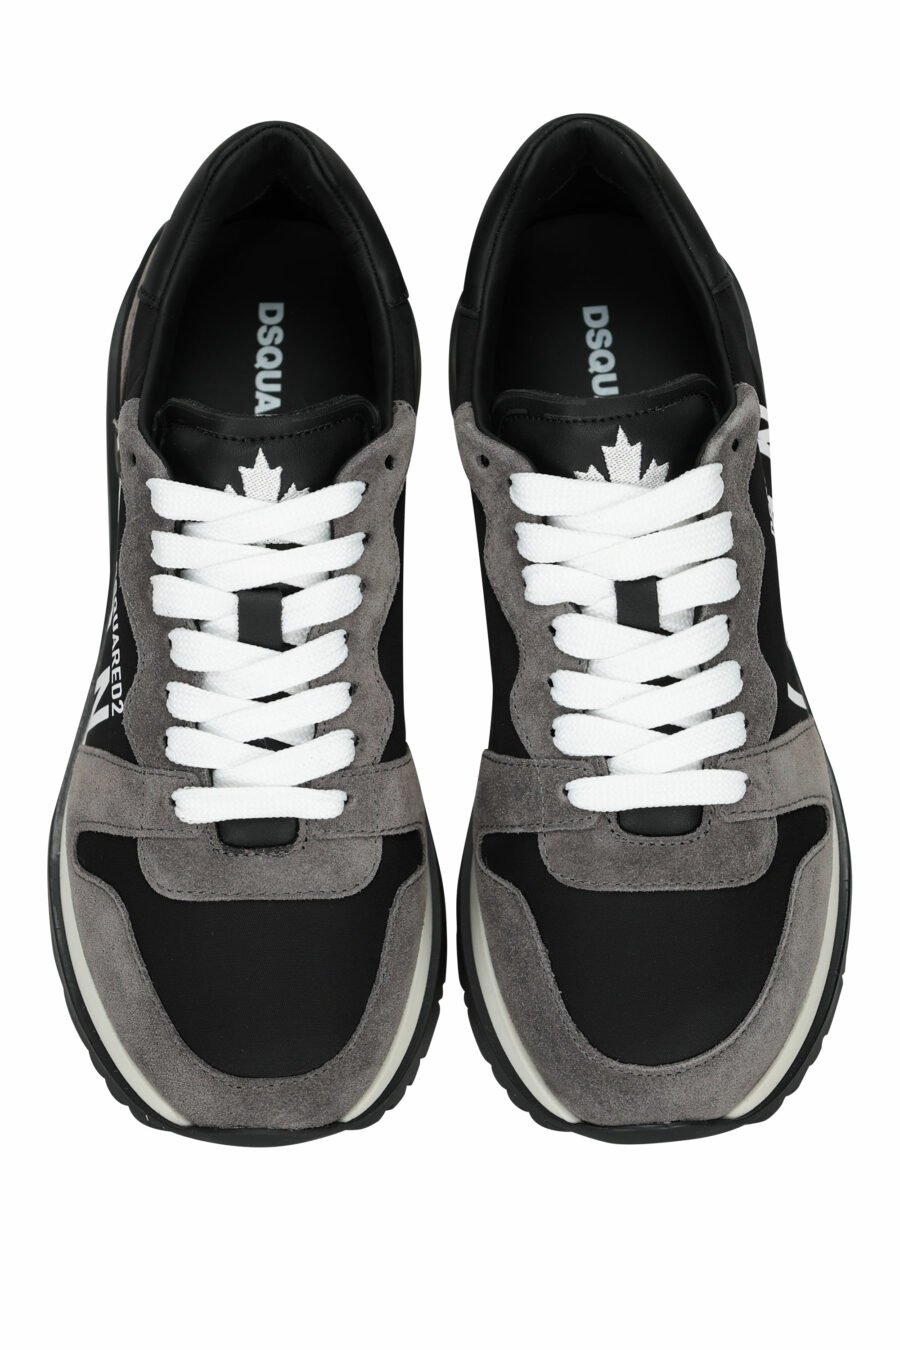 Black trainers with brown mix and mini logo "icon" - 8055777303825 4